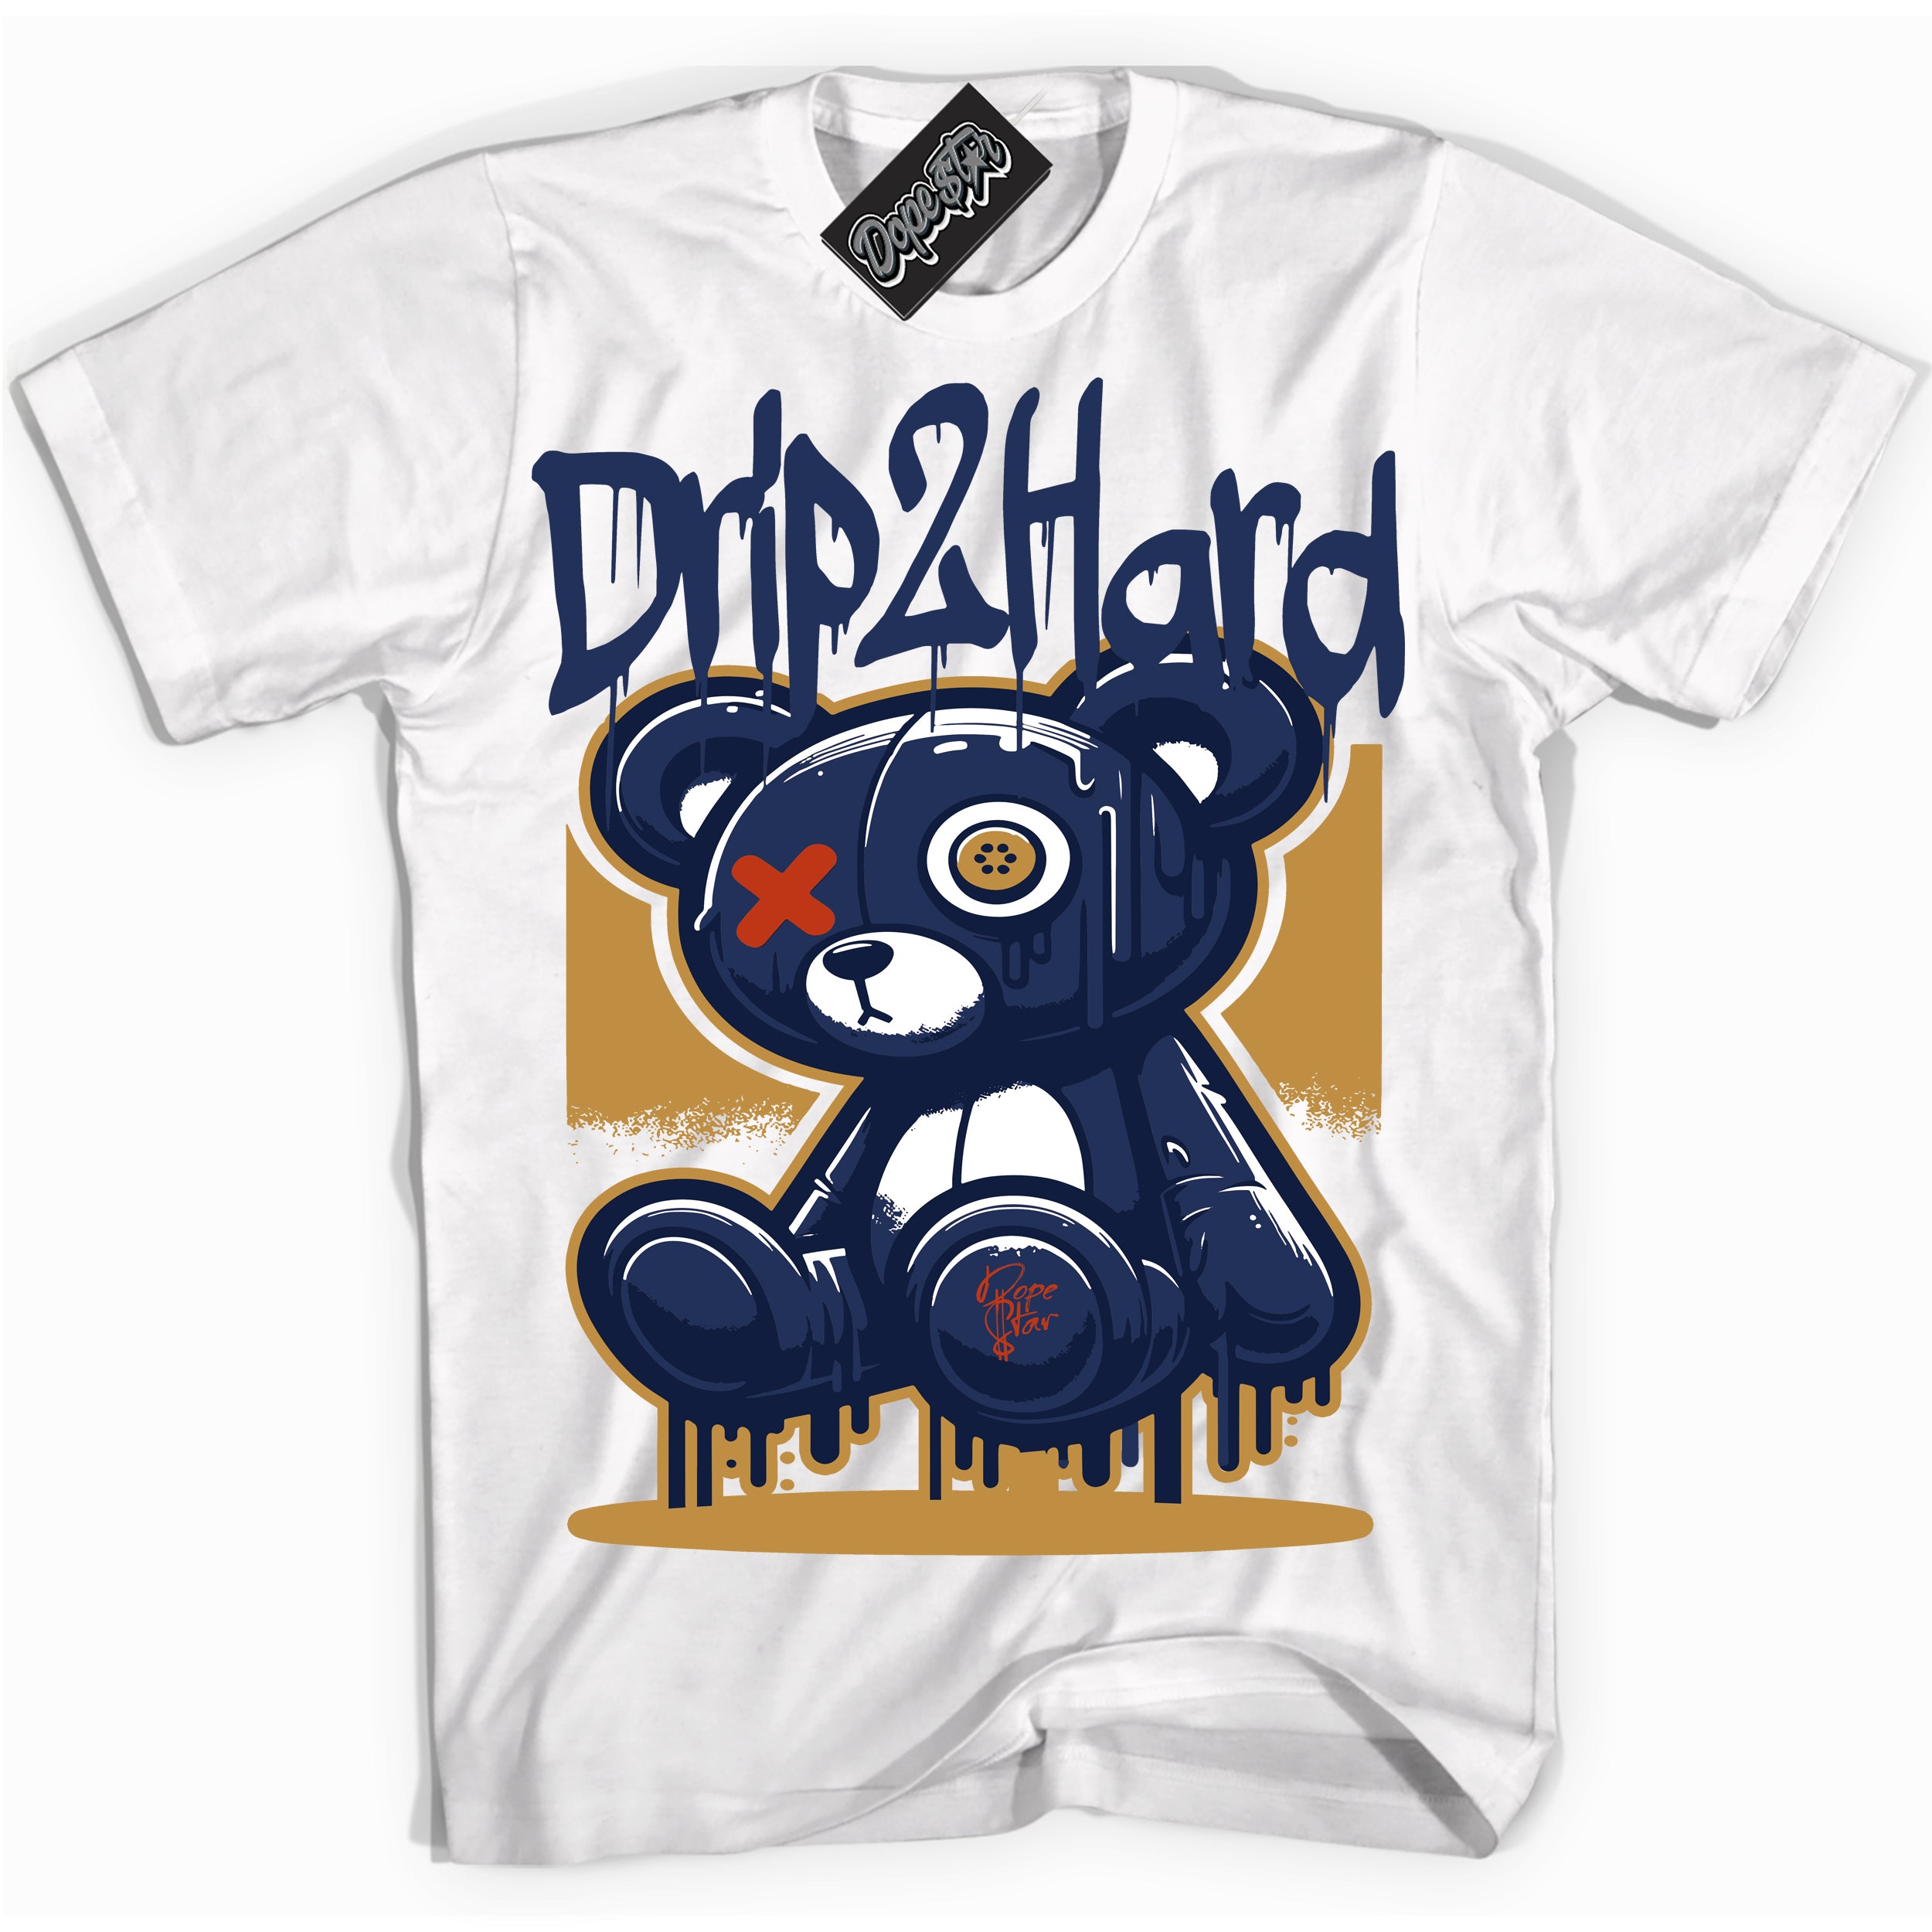 Cool White graphic tee with “ Drip 2 Hard ” design, that perfectly matches Orange Label Navy Gum